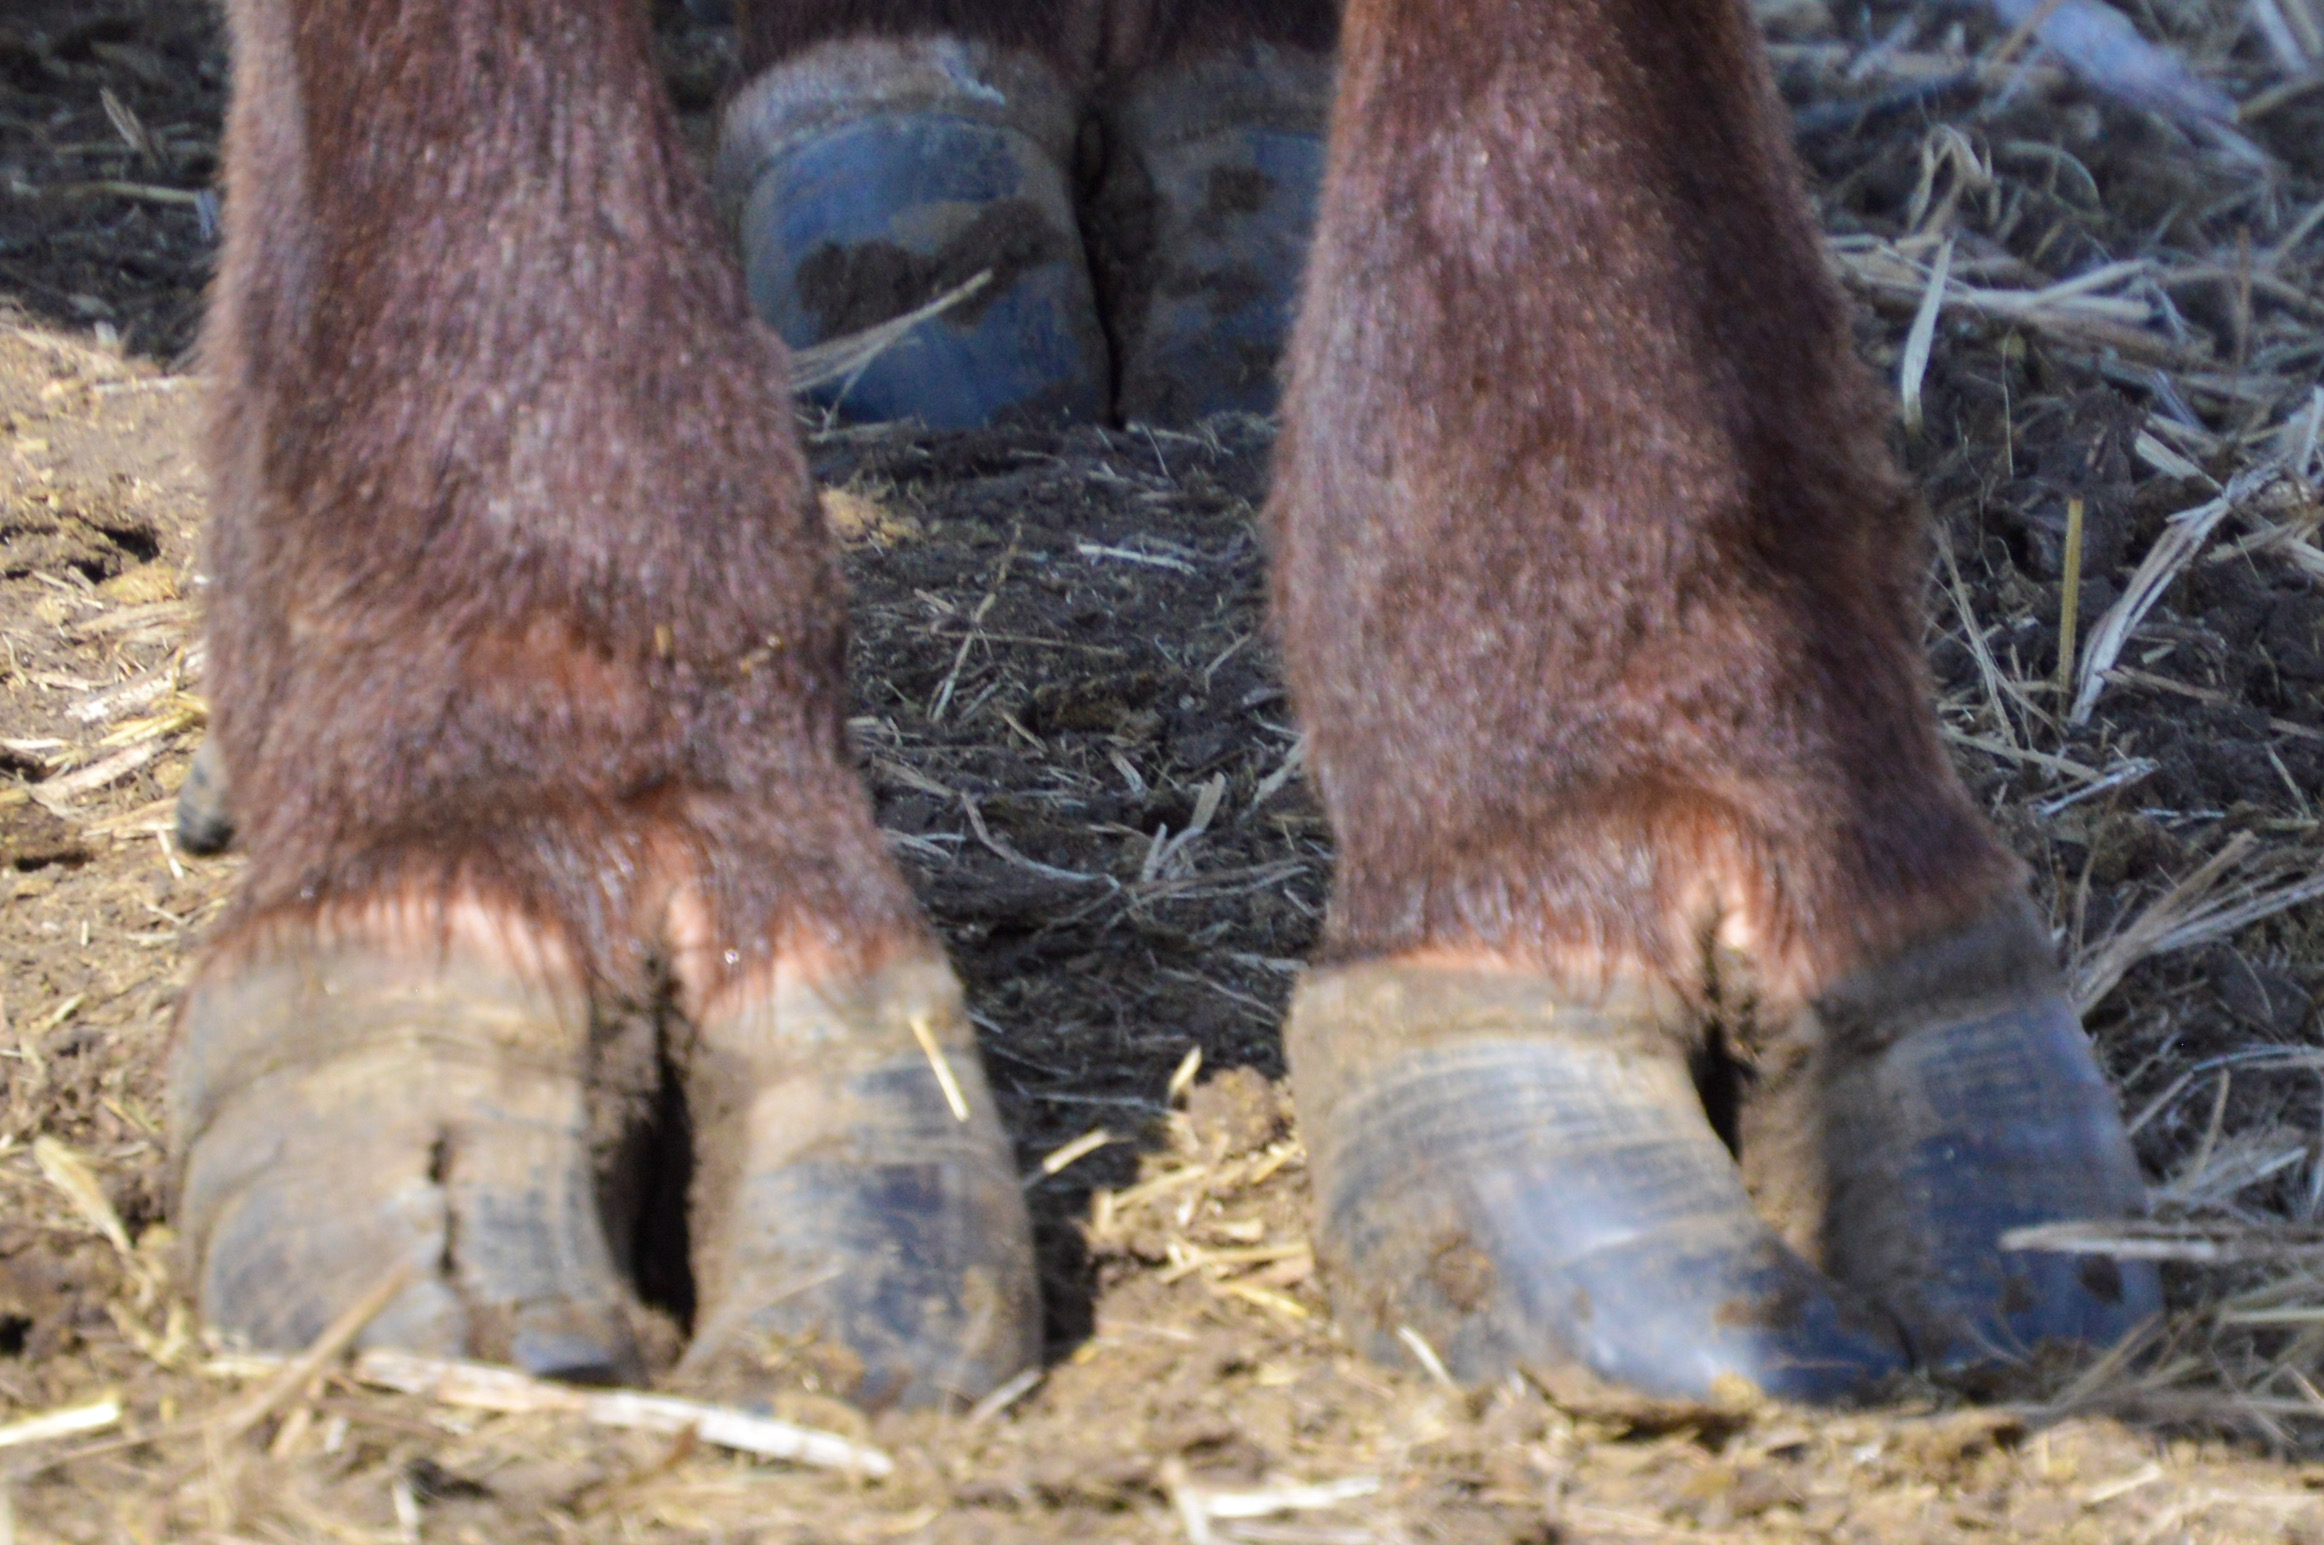 Feet issues such as vertical cracks can be a concern at calving time. (NDSU photo)